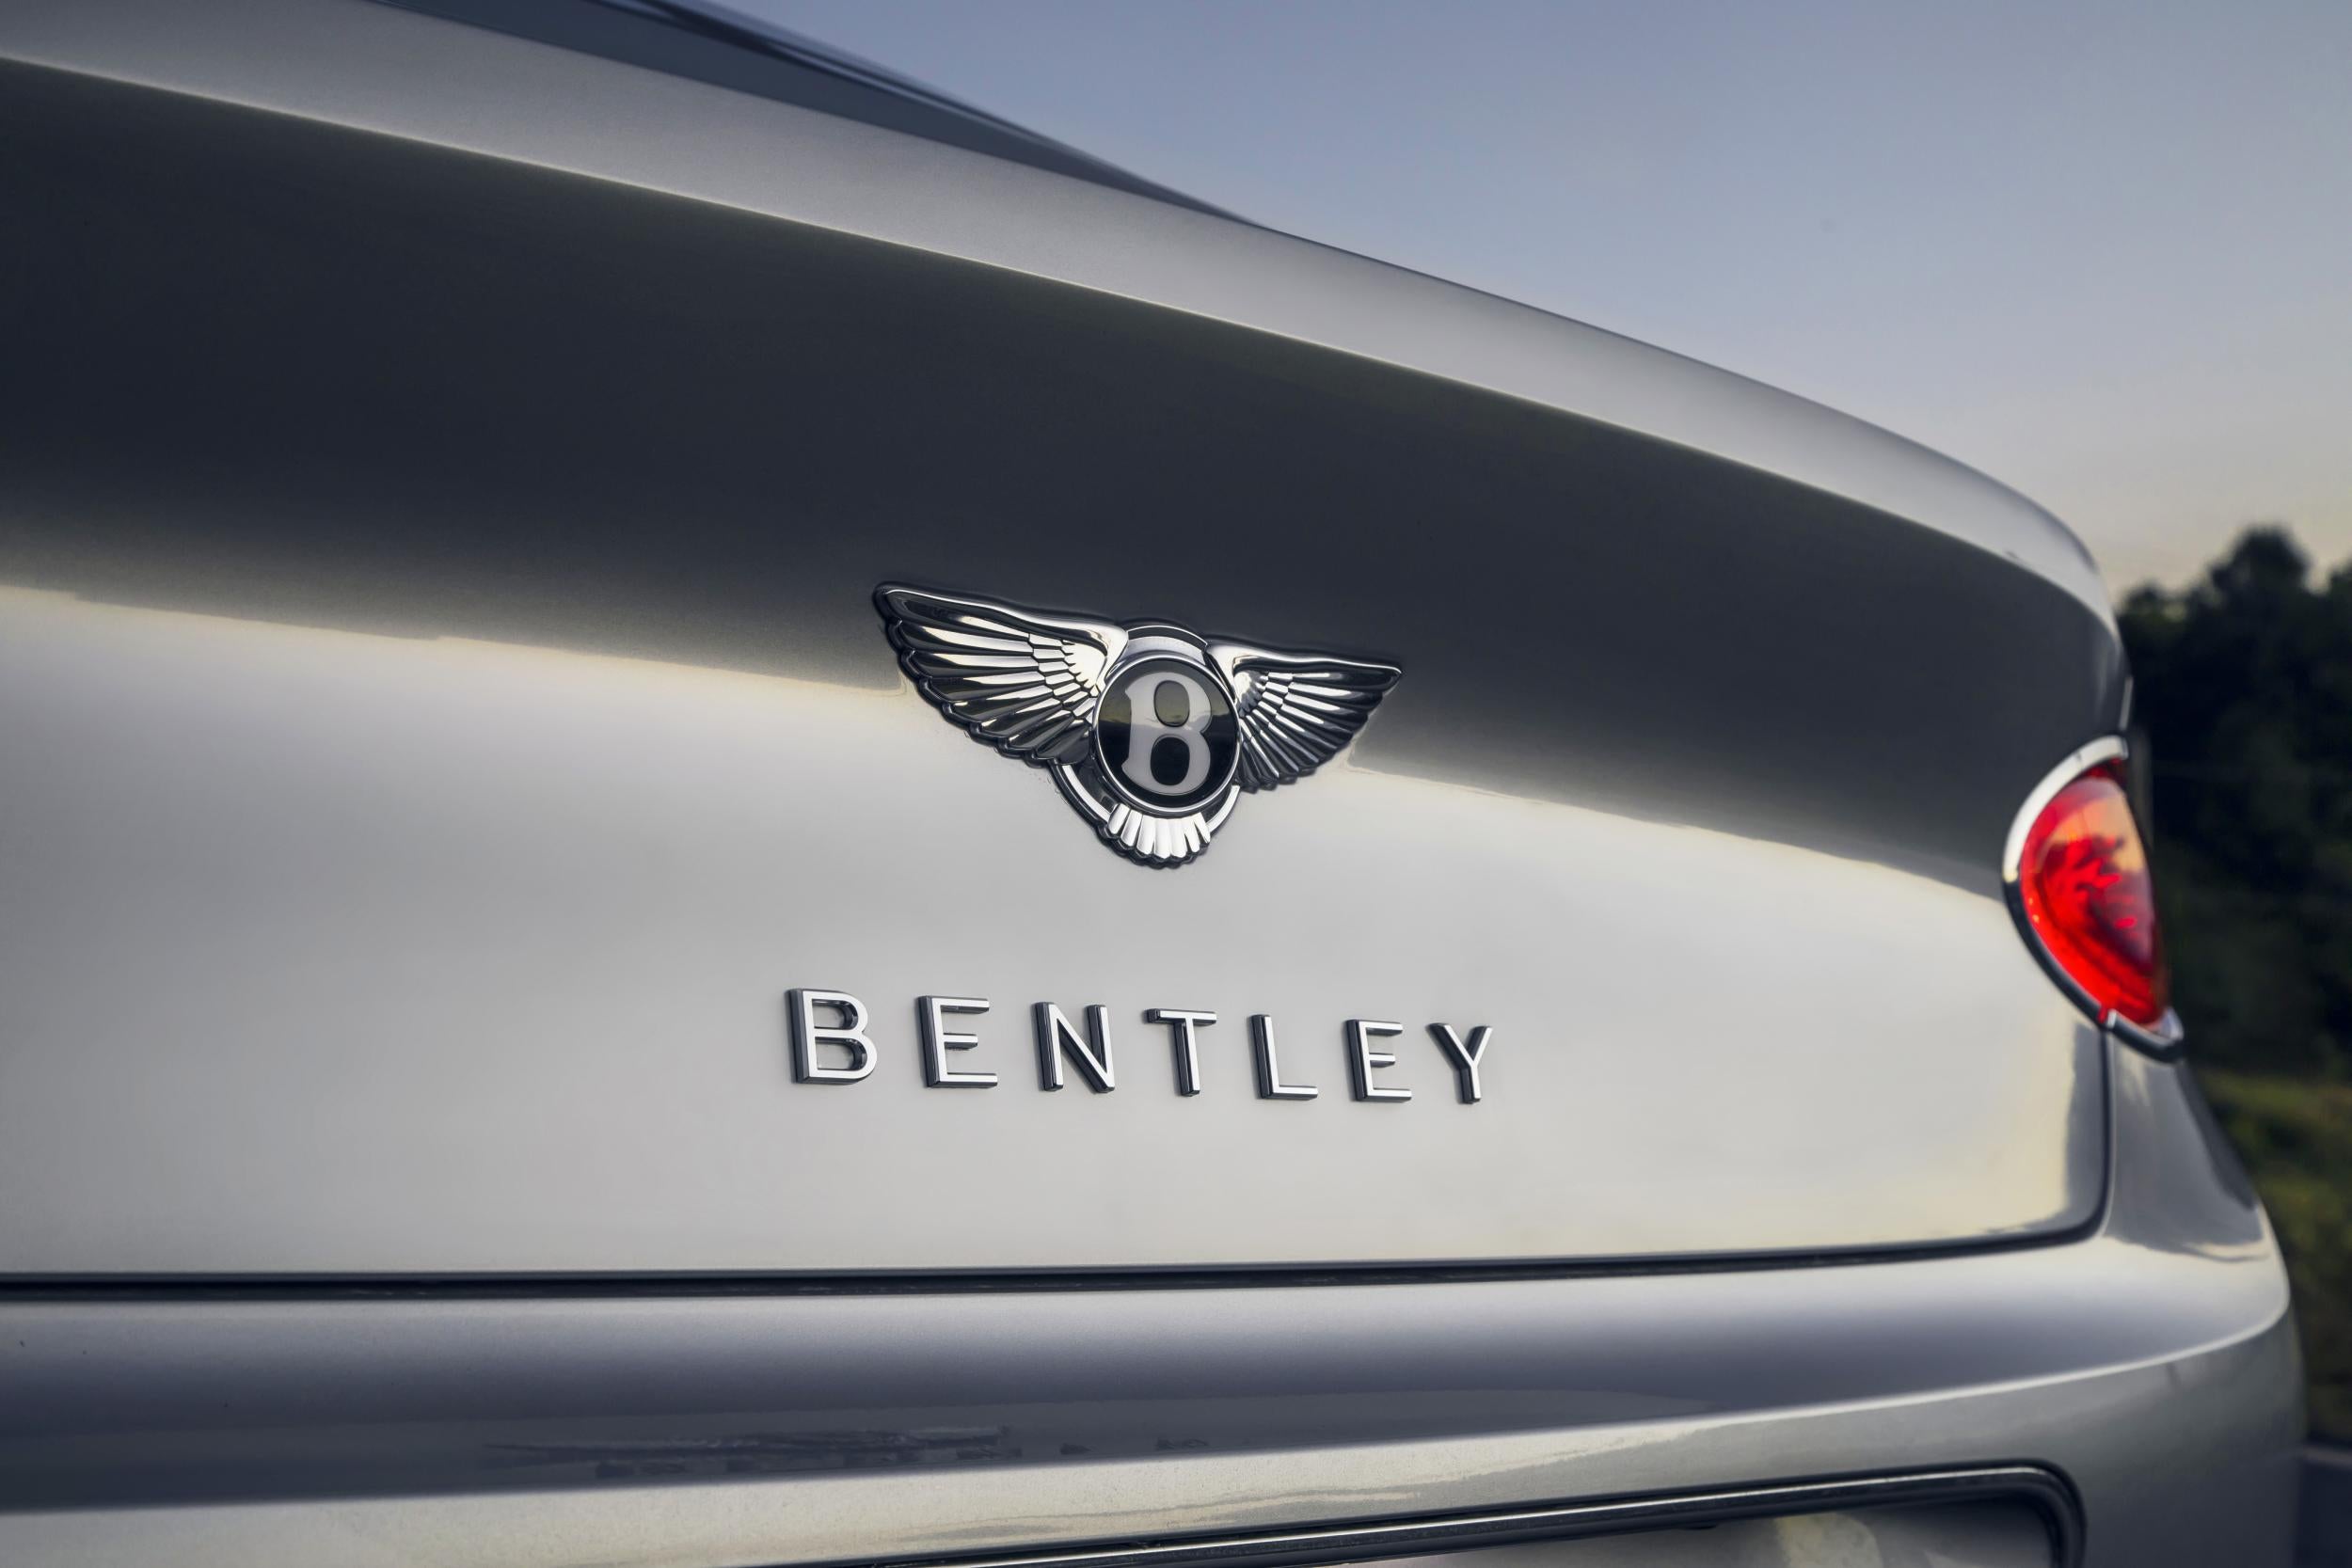 Bentley in 2018 released the all-new 2019 Continental GT